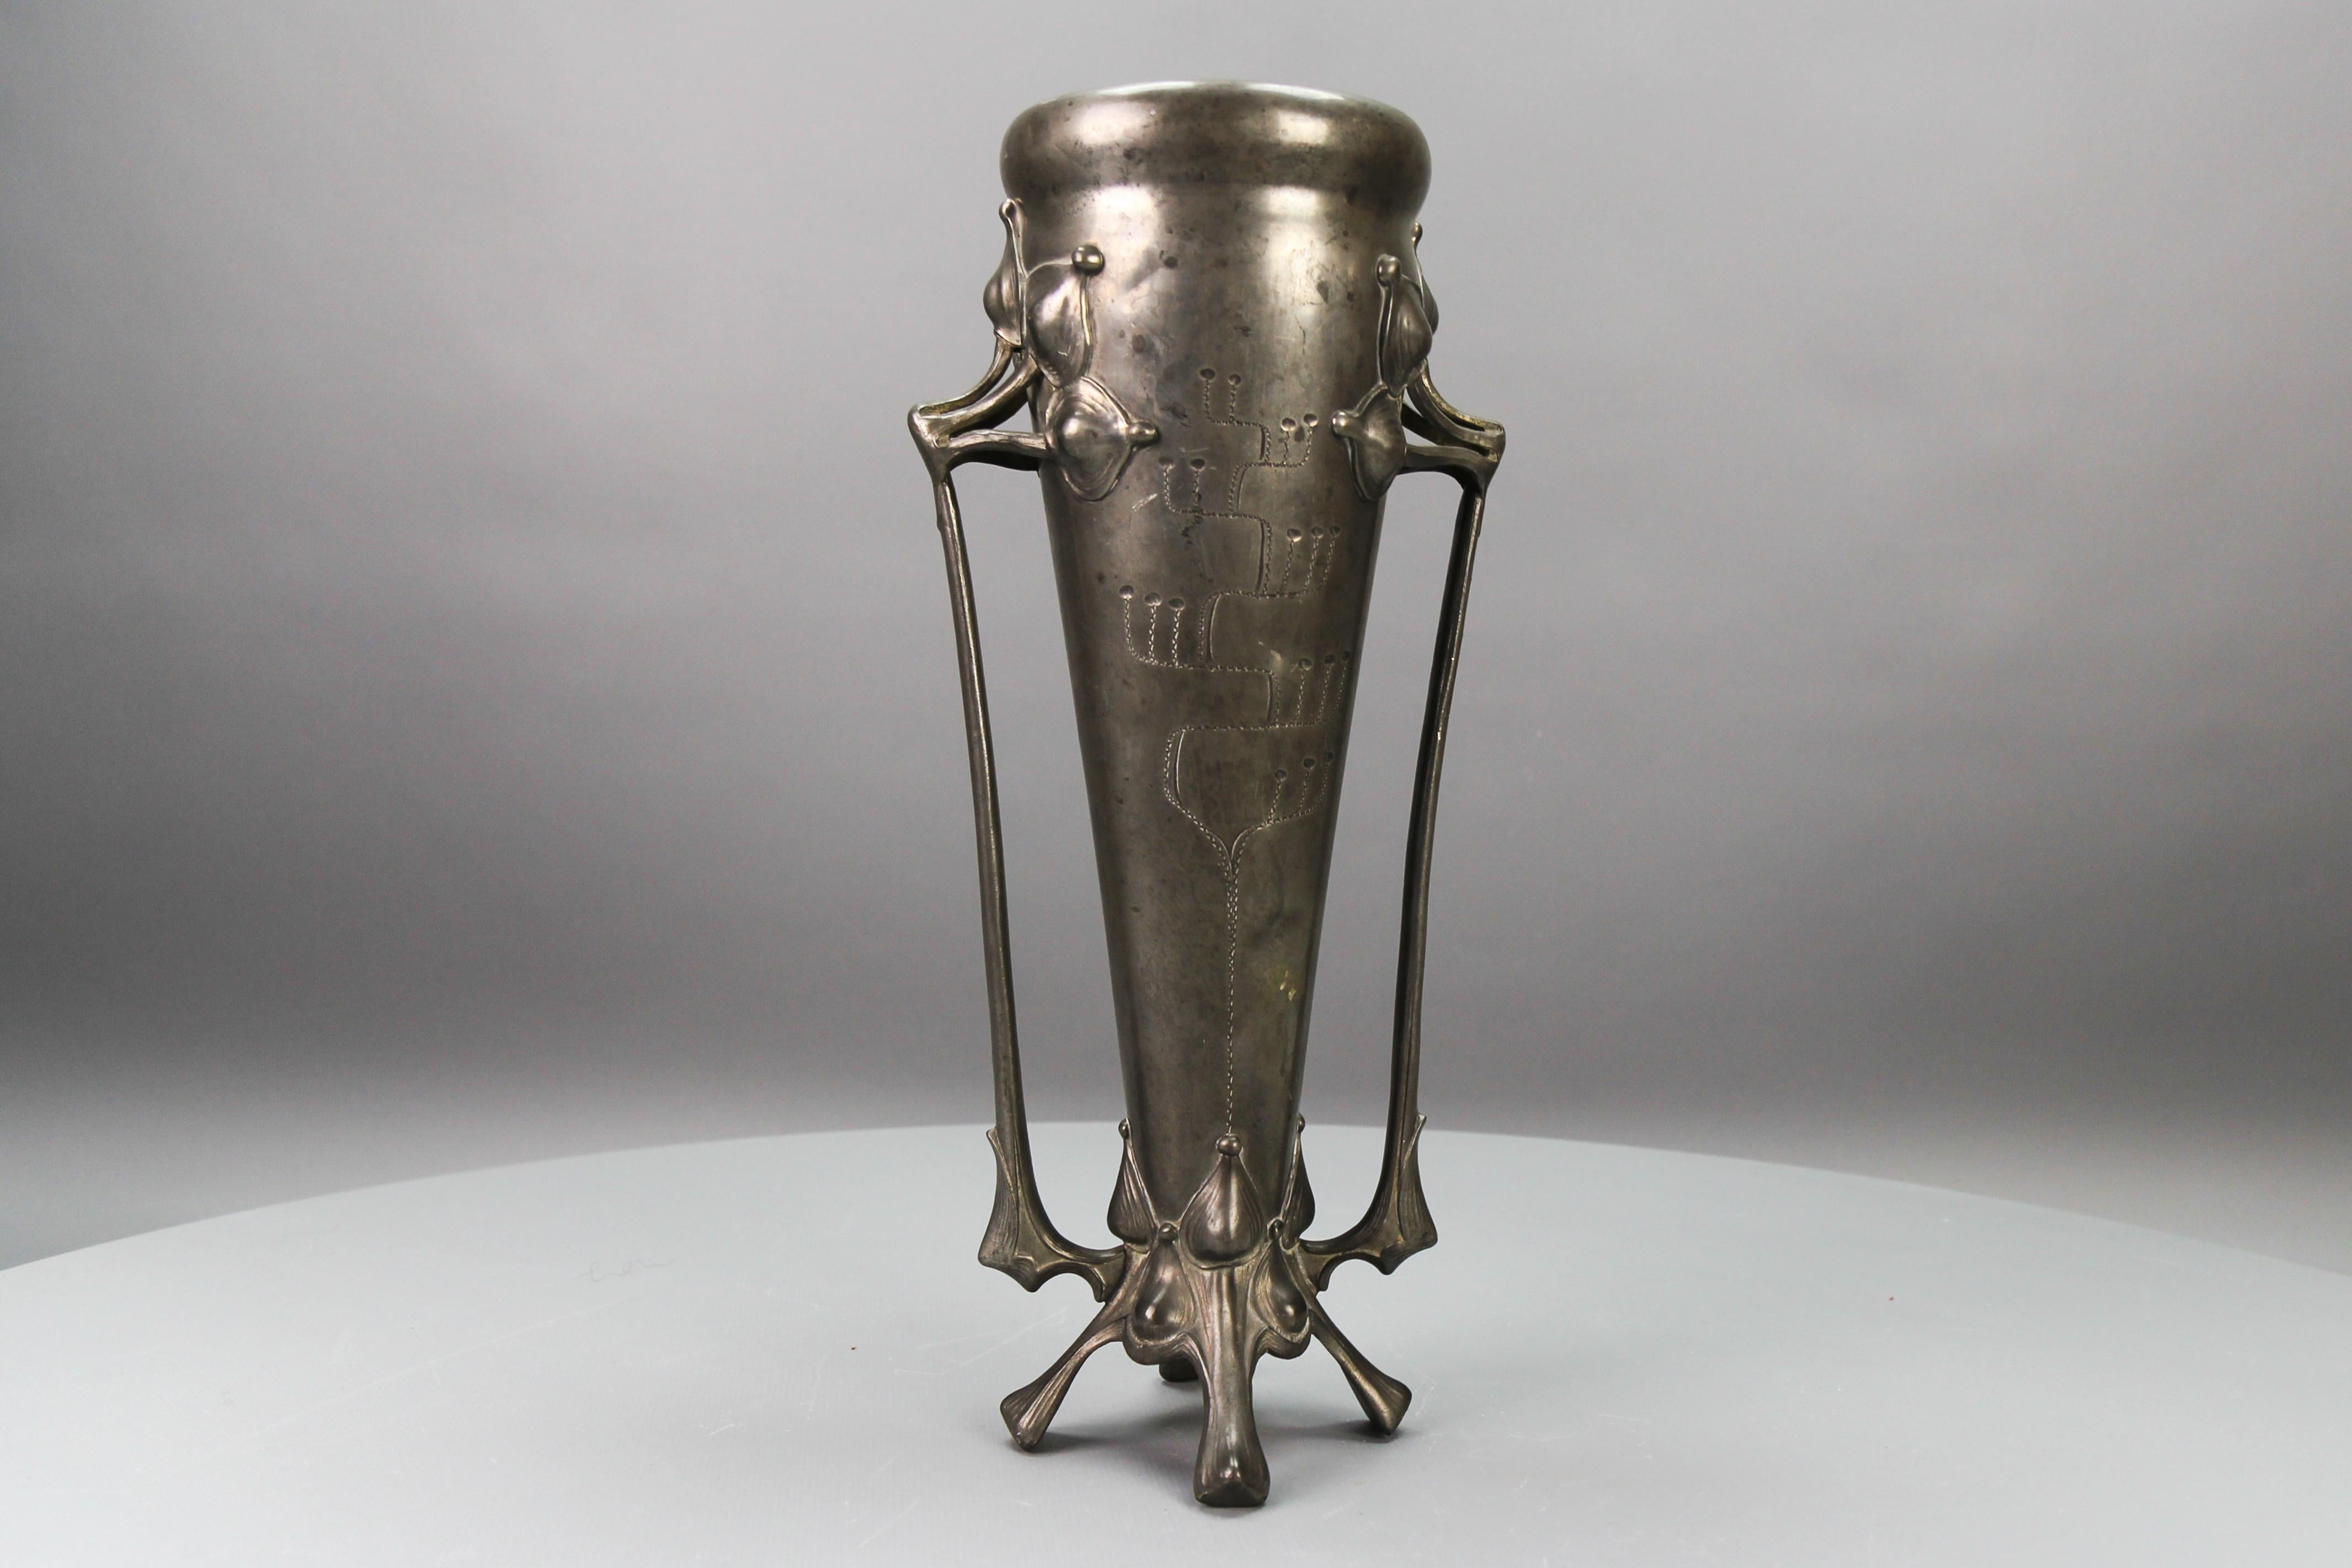 Art Nouveau Pewter Vase, Early 20th Century, France.
This beautiful Art Nouveau period conical vase on 4 leaf-like feet features tall, flowering plant-shaped elongated handles and engravings of stylized tendrils.
Dimensions: height: 38 cm / 14.96